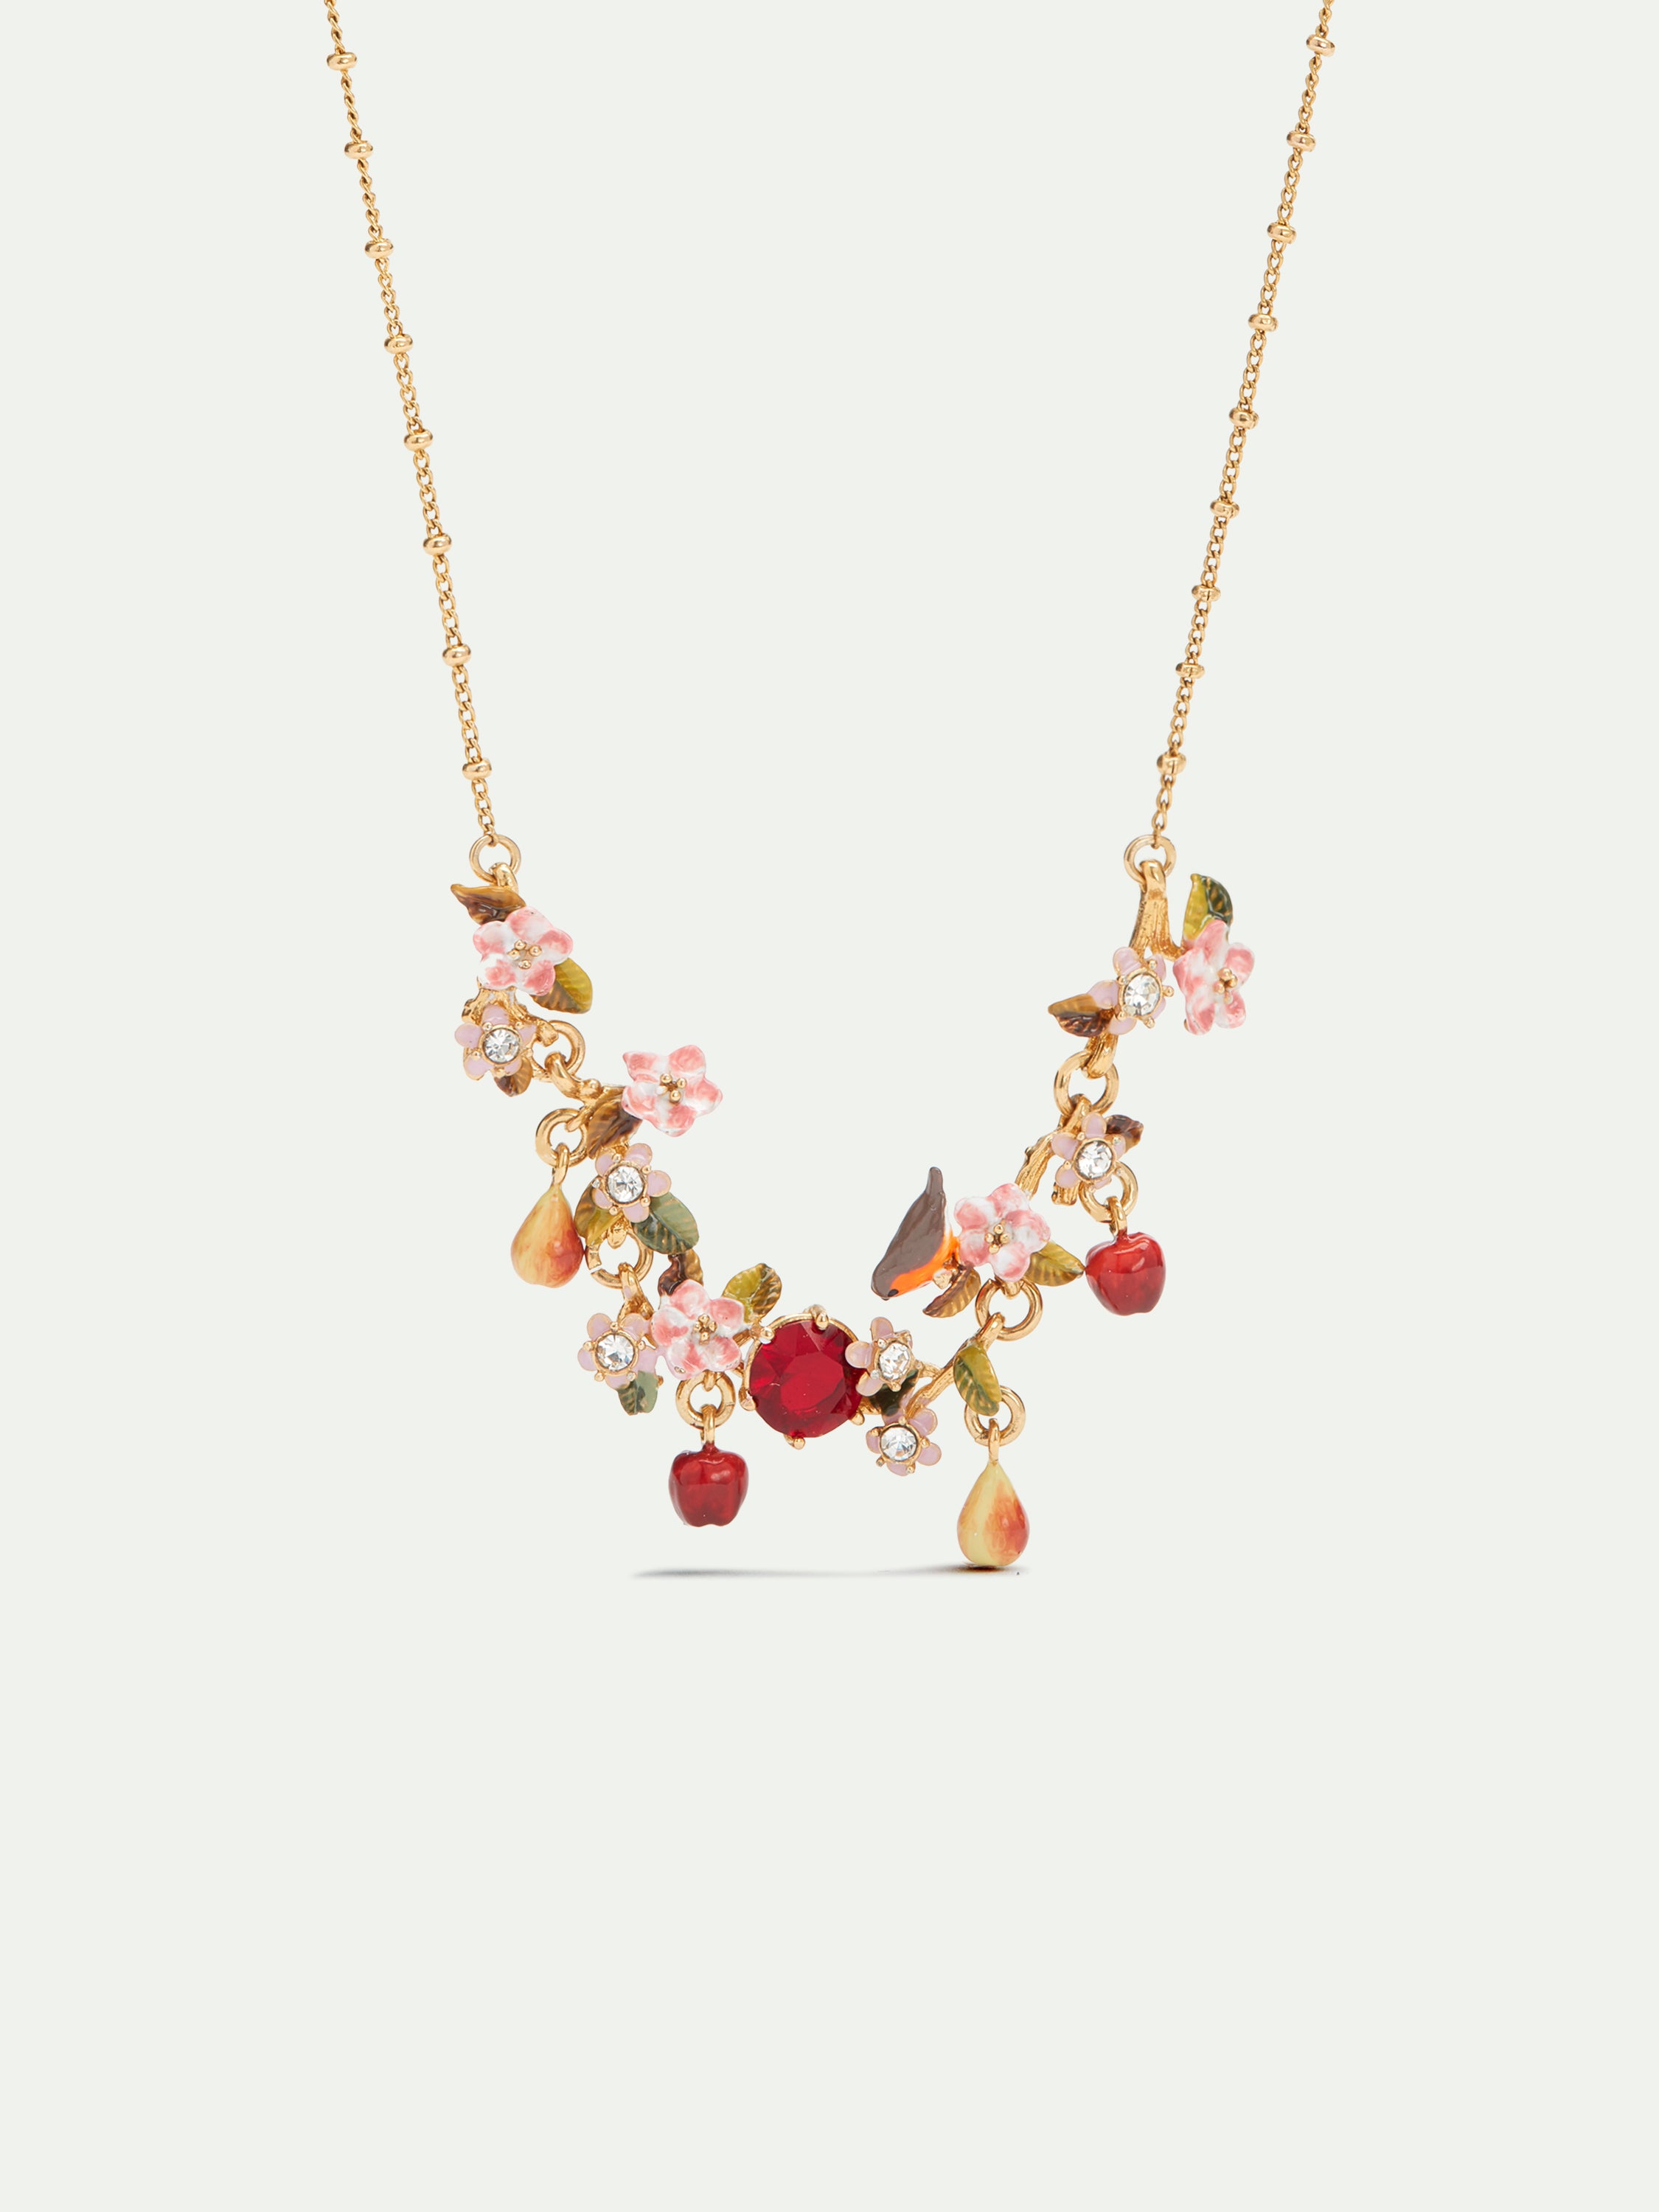 Apple, robin and apple blossom statement necklace